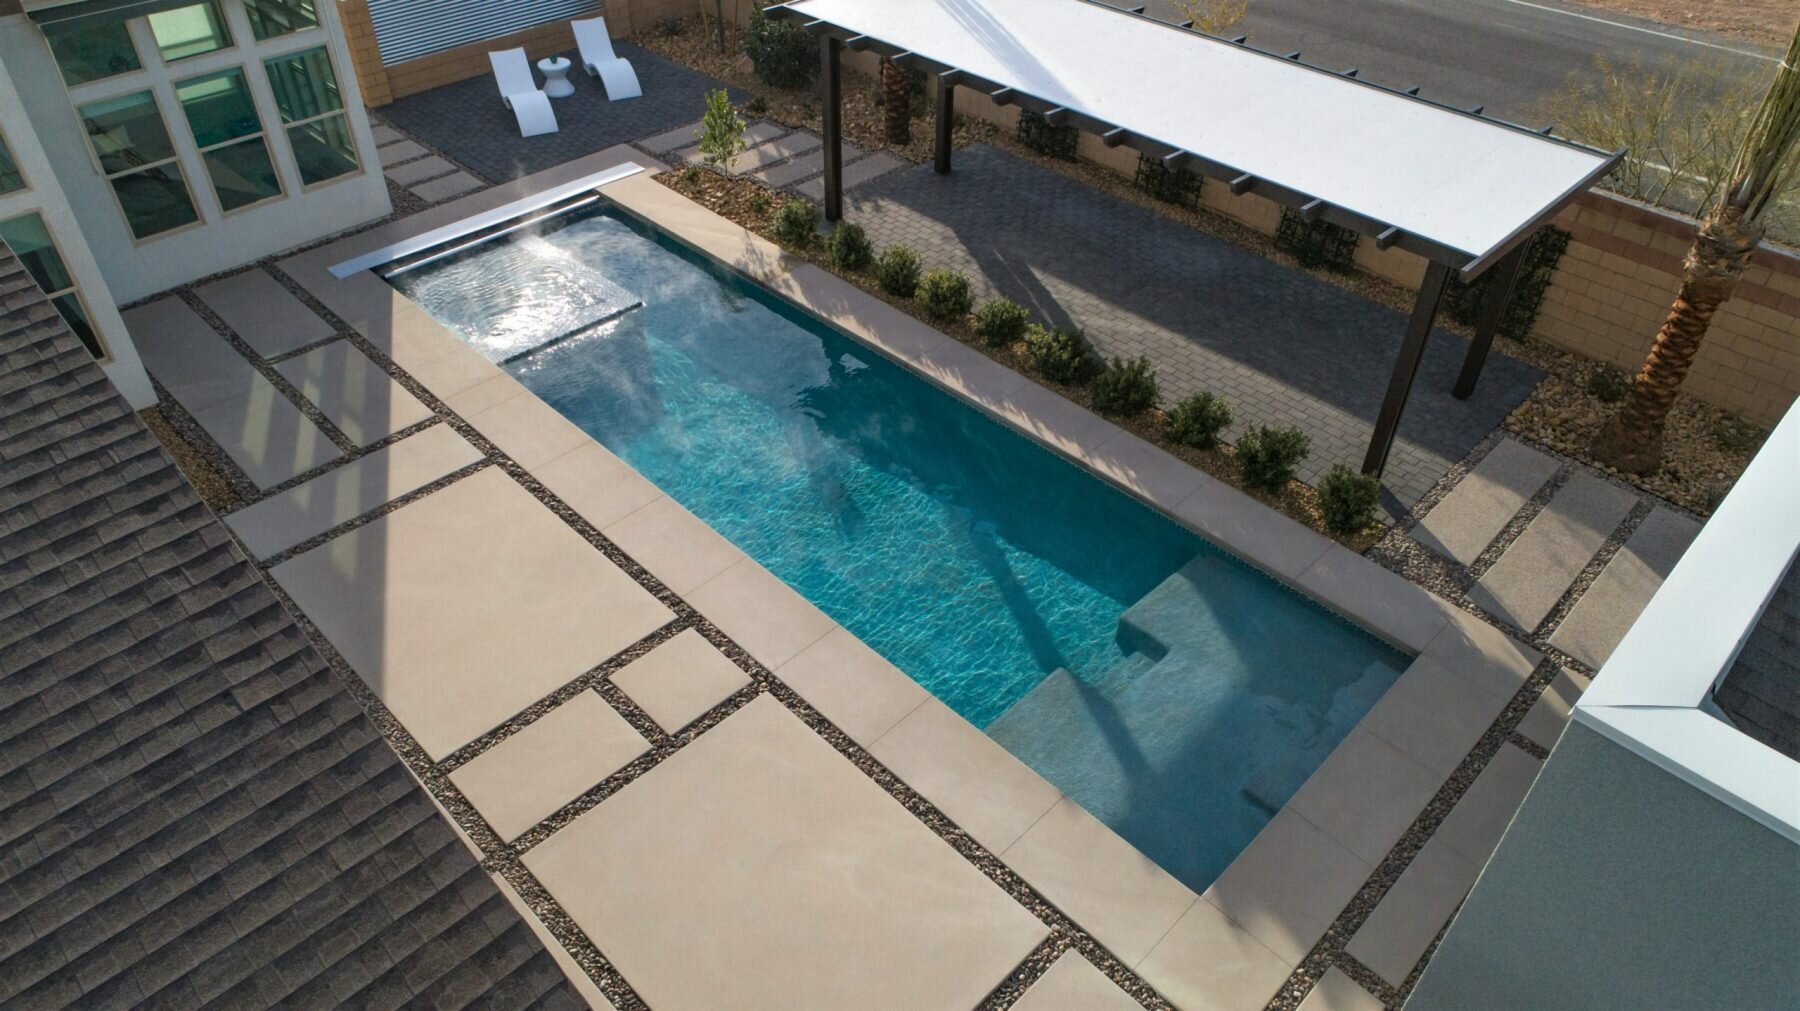 Geometric sport pool with automatic pool cover, spa, and shallow-end tanning ledge.